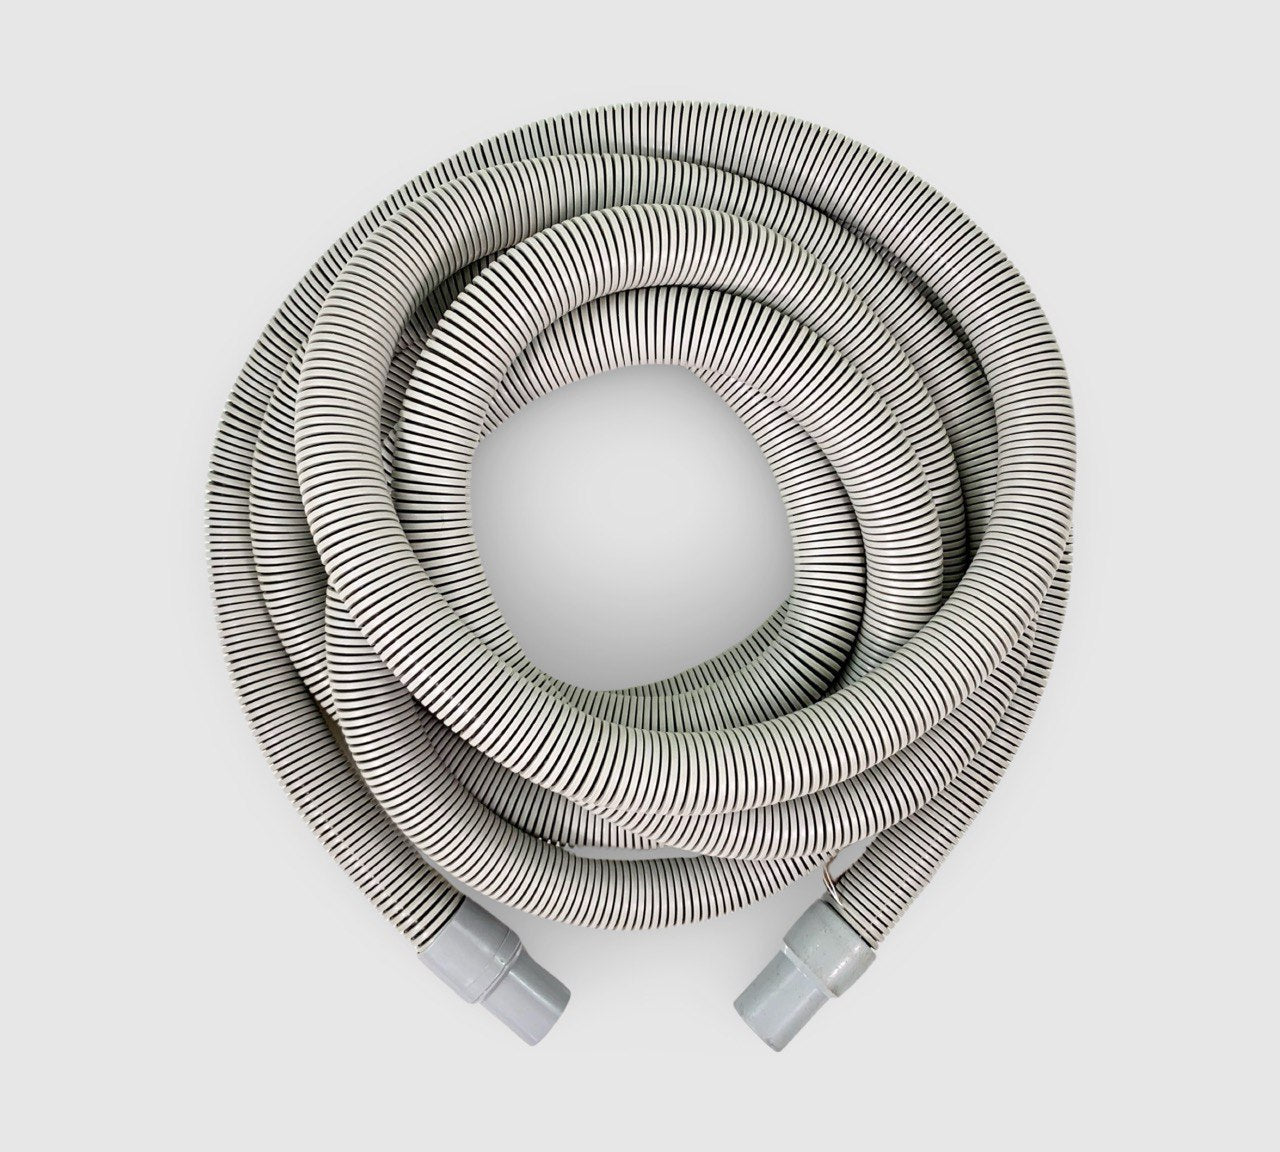 PRE-OWNED 25ft / 7.6m GREY 1.5 inch Vacuum Hose ONLY (NO Solution Hose) fitted with 1 x GREY Swivel & 1 x GREY Non-swivel 1.5 inch Hose Cuff